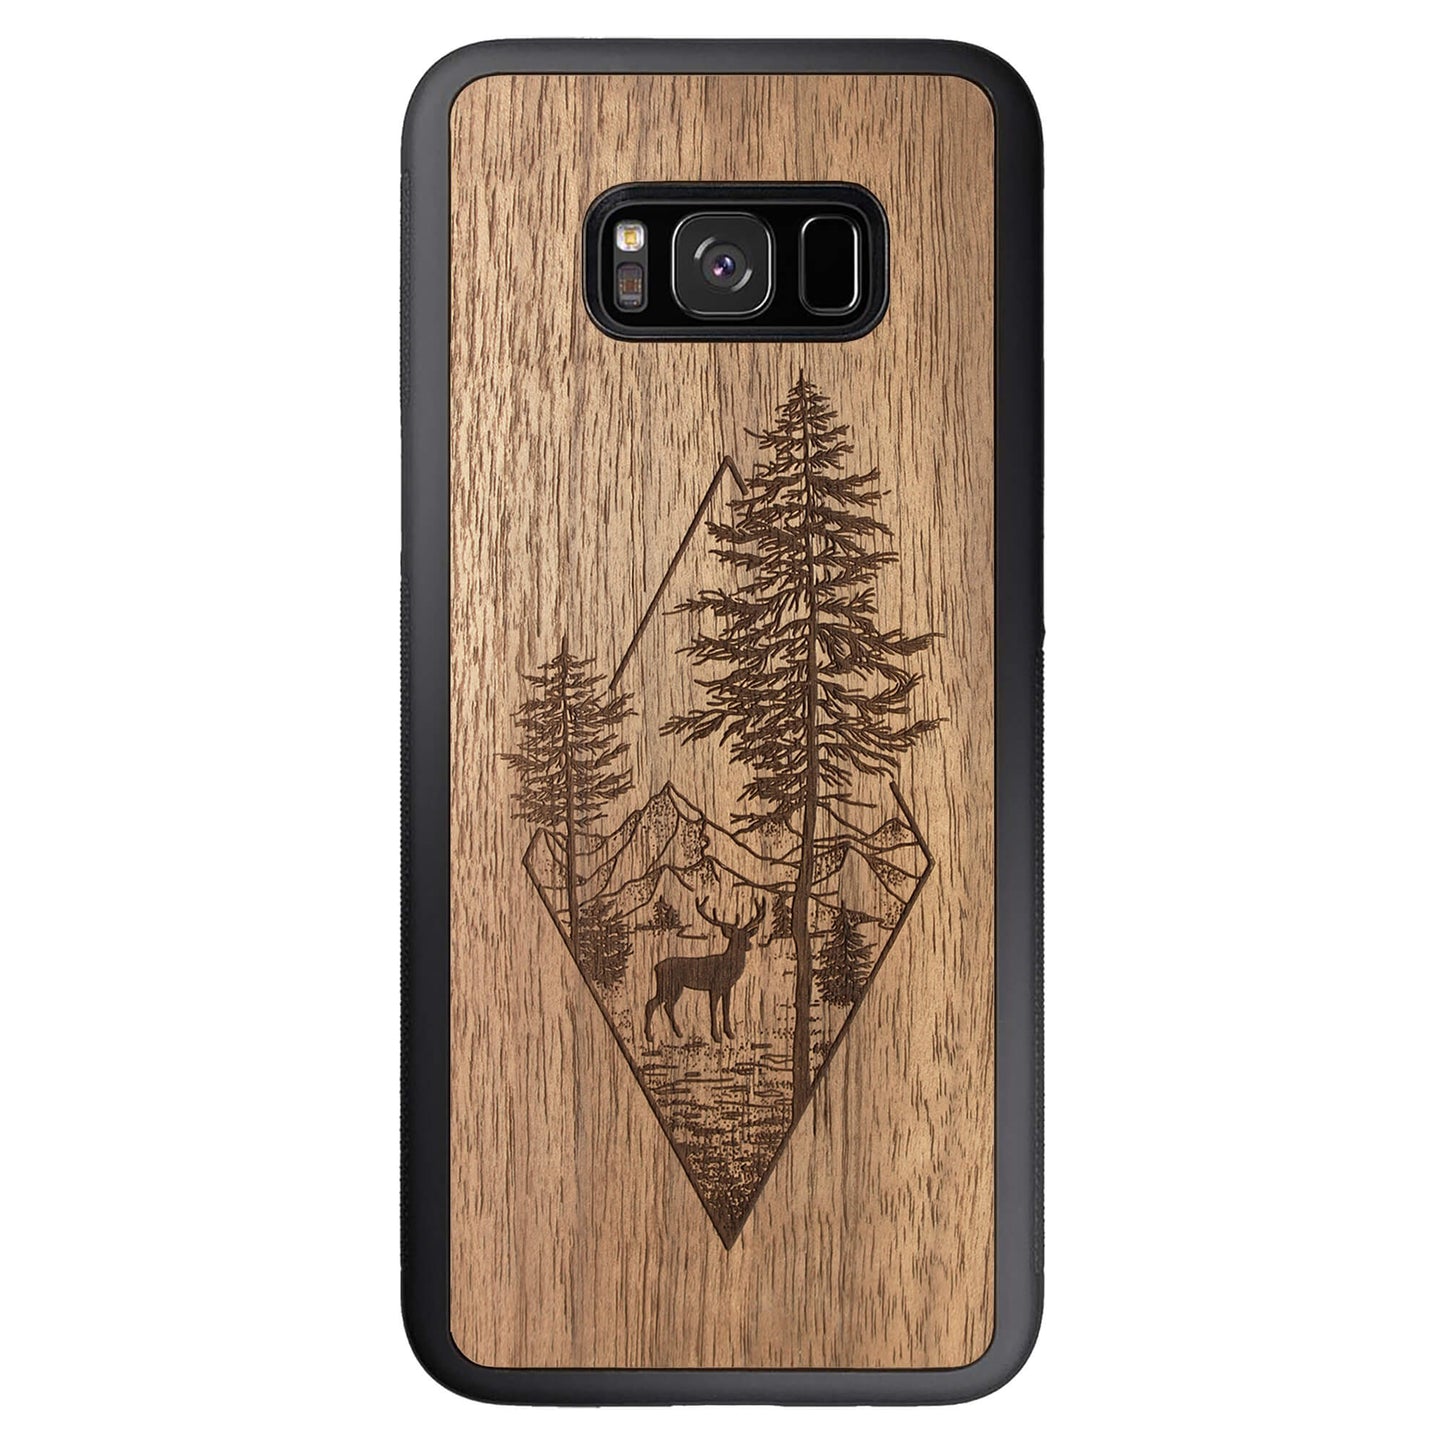 Wooden Case for Samsung Galaxy S8 Plus Deer Woodland